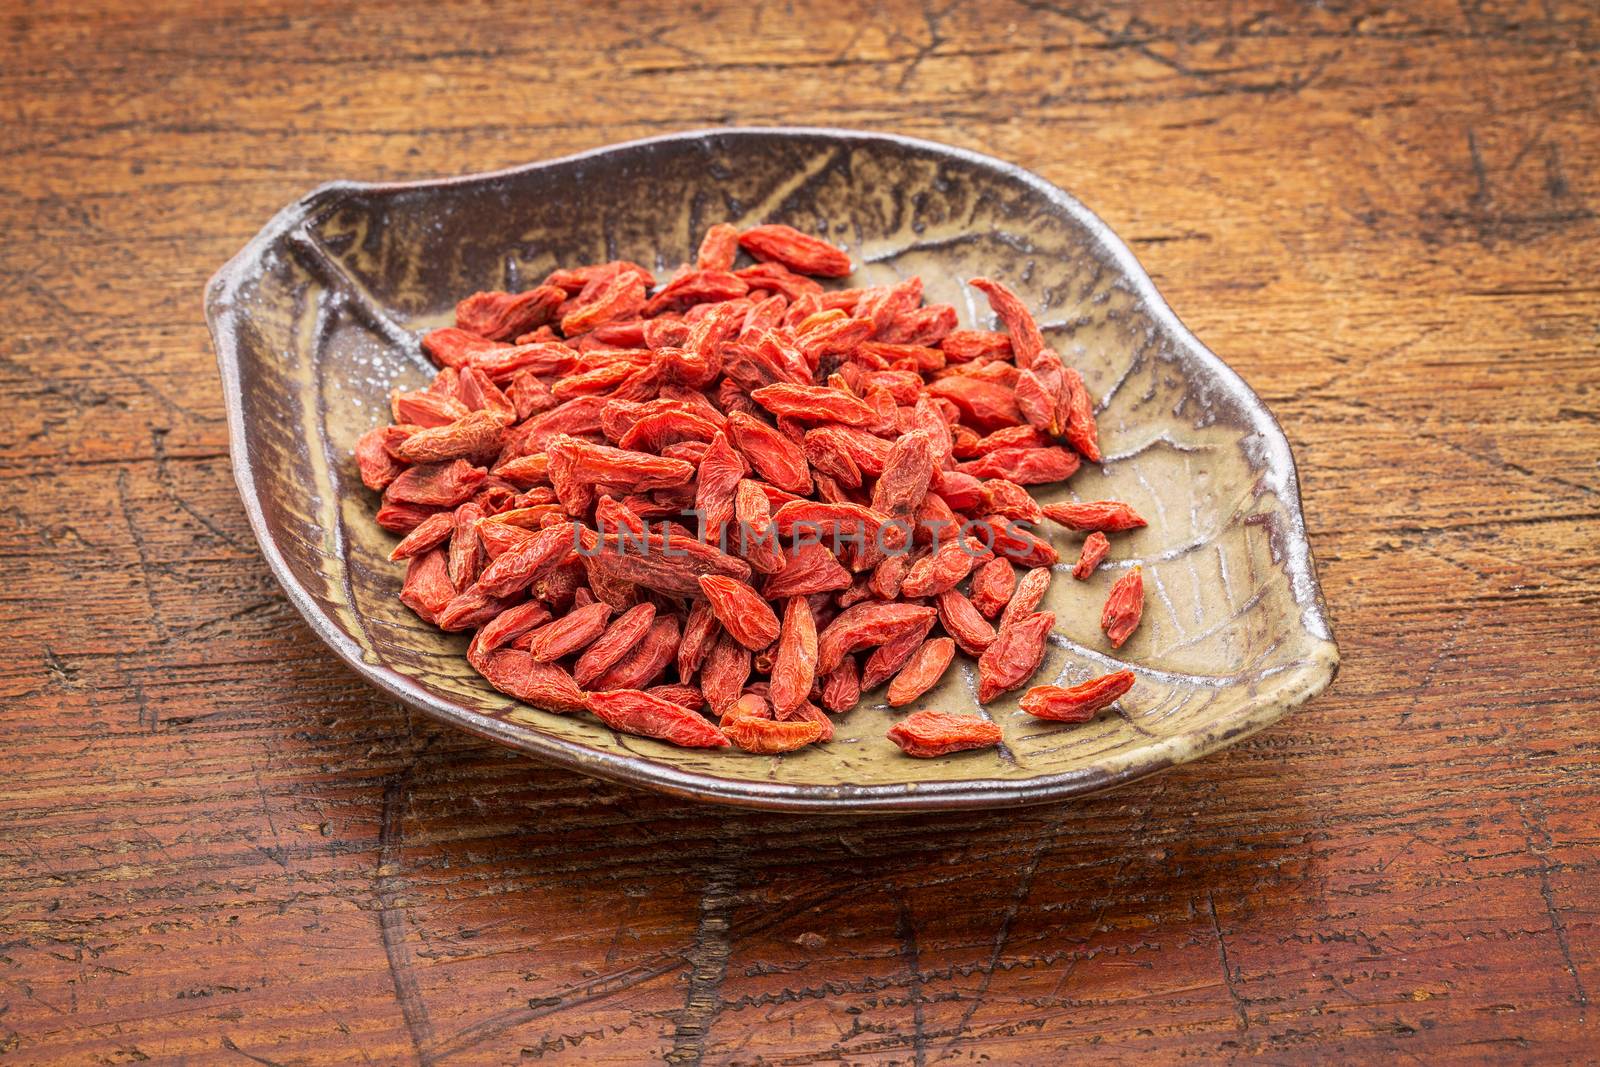 dried goji berries (wolfberry in a leaf shaped ceramic bowl against rustic wood